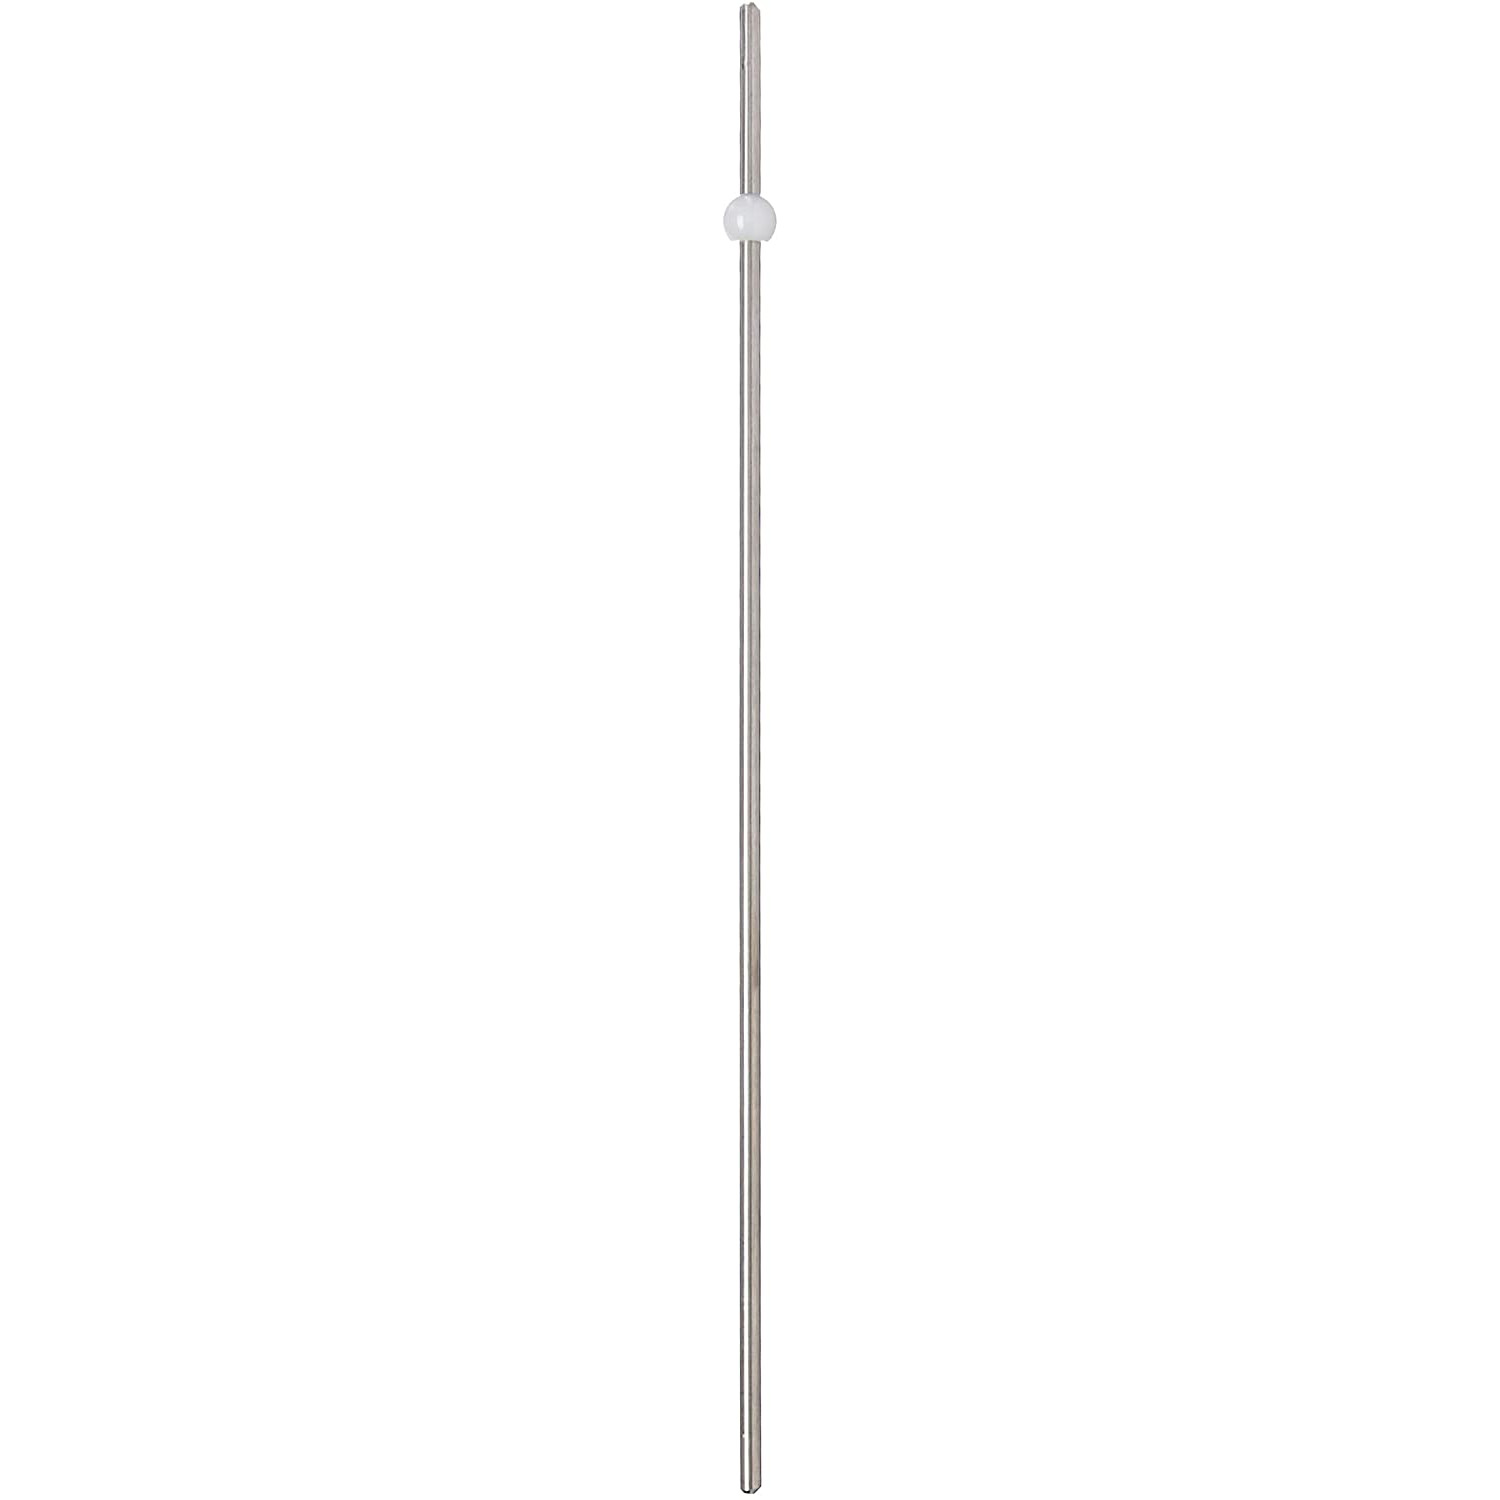 Horizontal Rod 13" for Lavatory Sink Pop-Up Extensions